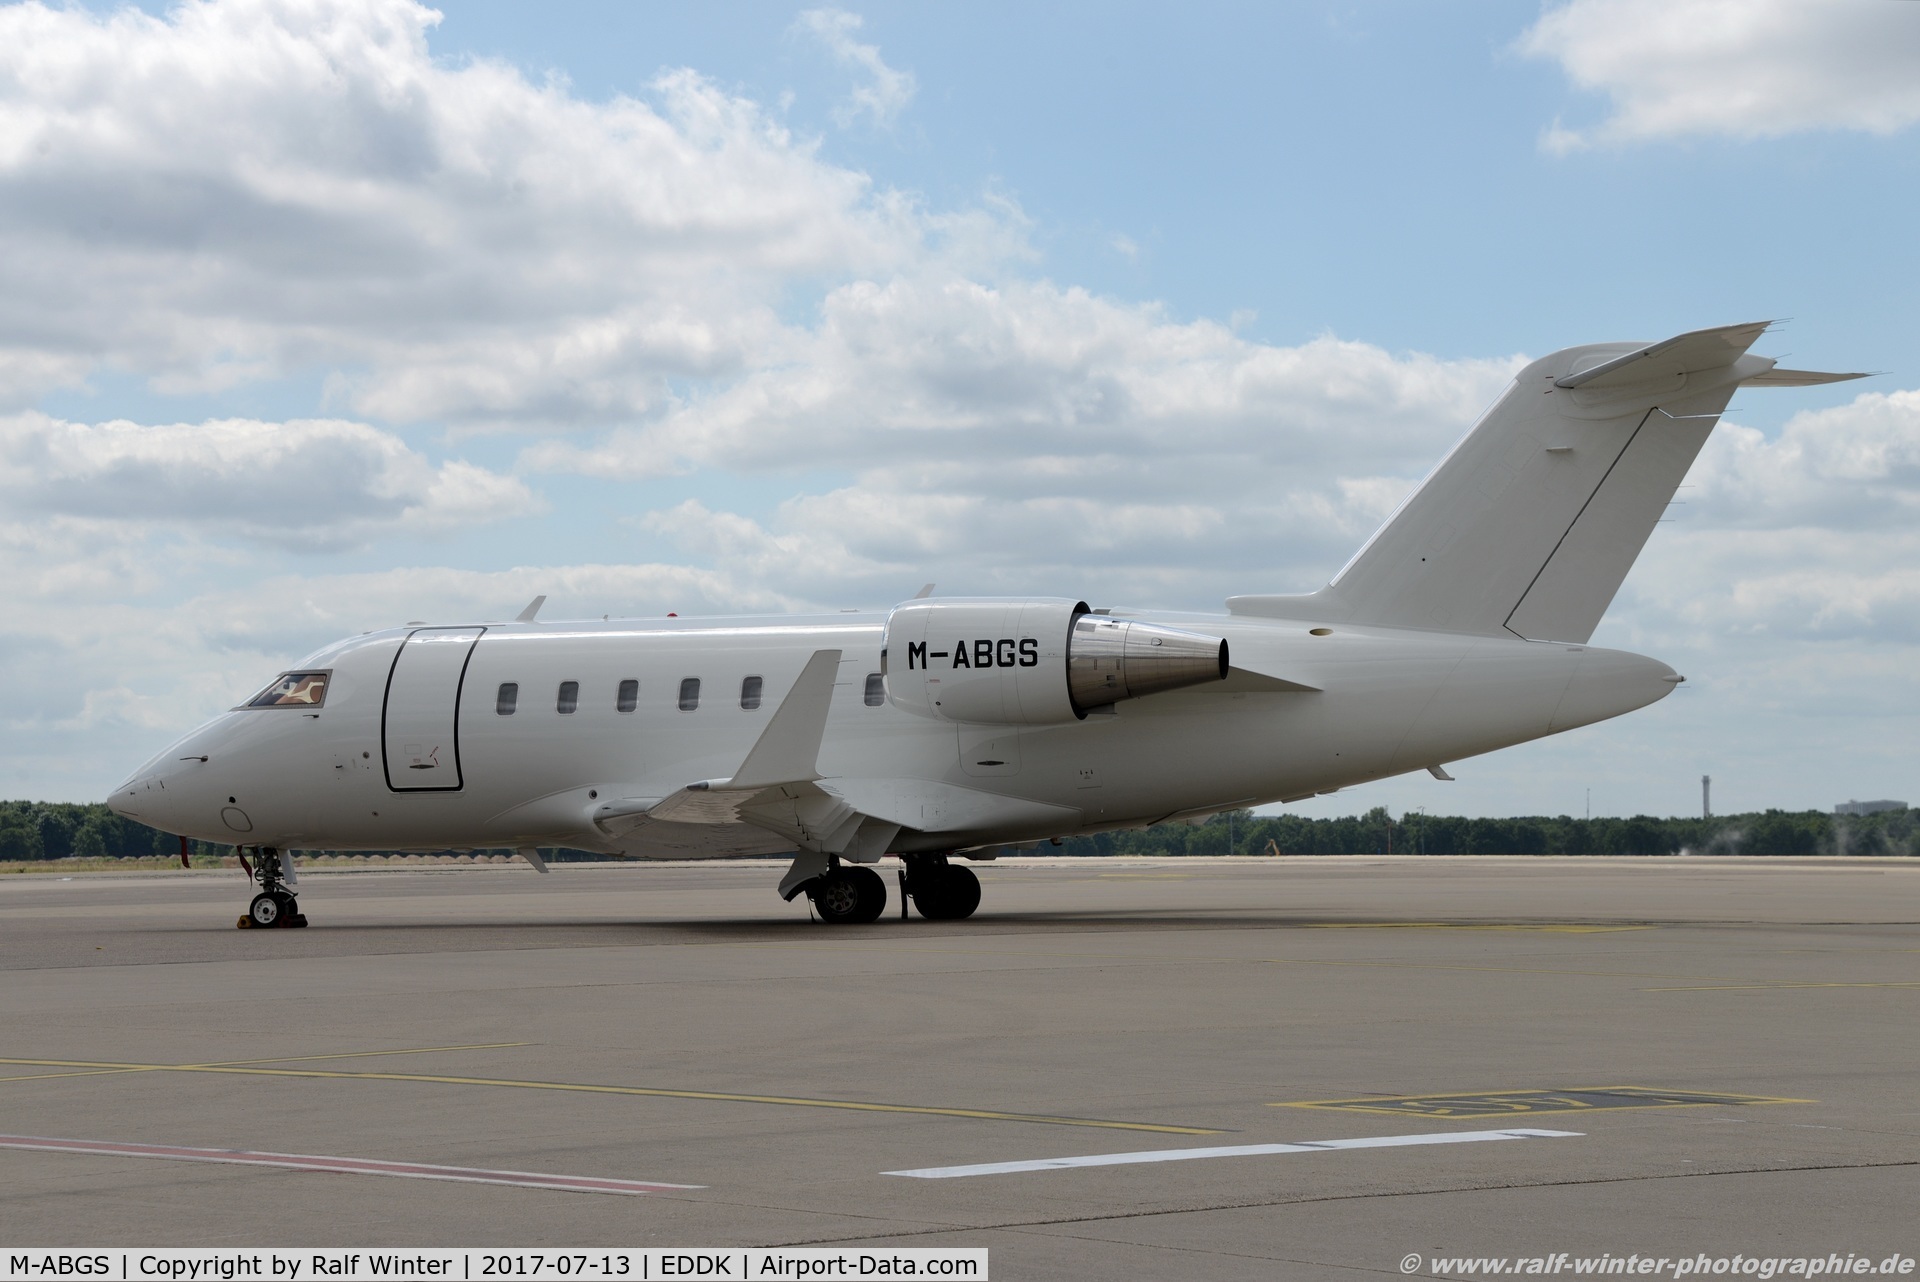 M-ABGS, 2013 Bombardier Challenger 605 (CL-600-2B16) C/N 5932, Bombardier CL-600-2B16 Challenger 605 - Viking Travel Services - 5932 - M-ABGS - 13.07.2017 - CGN